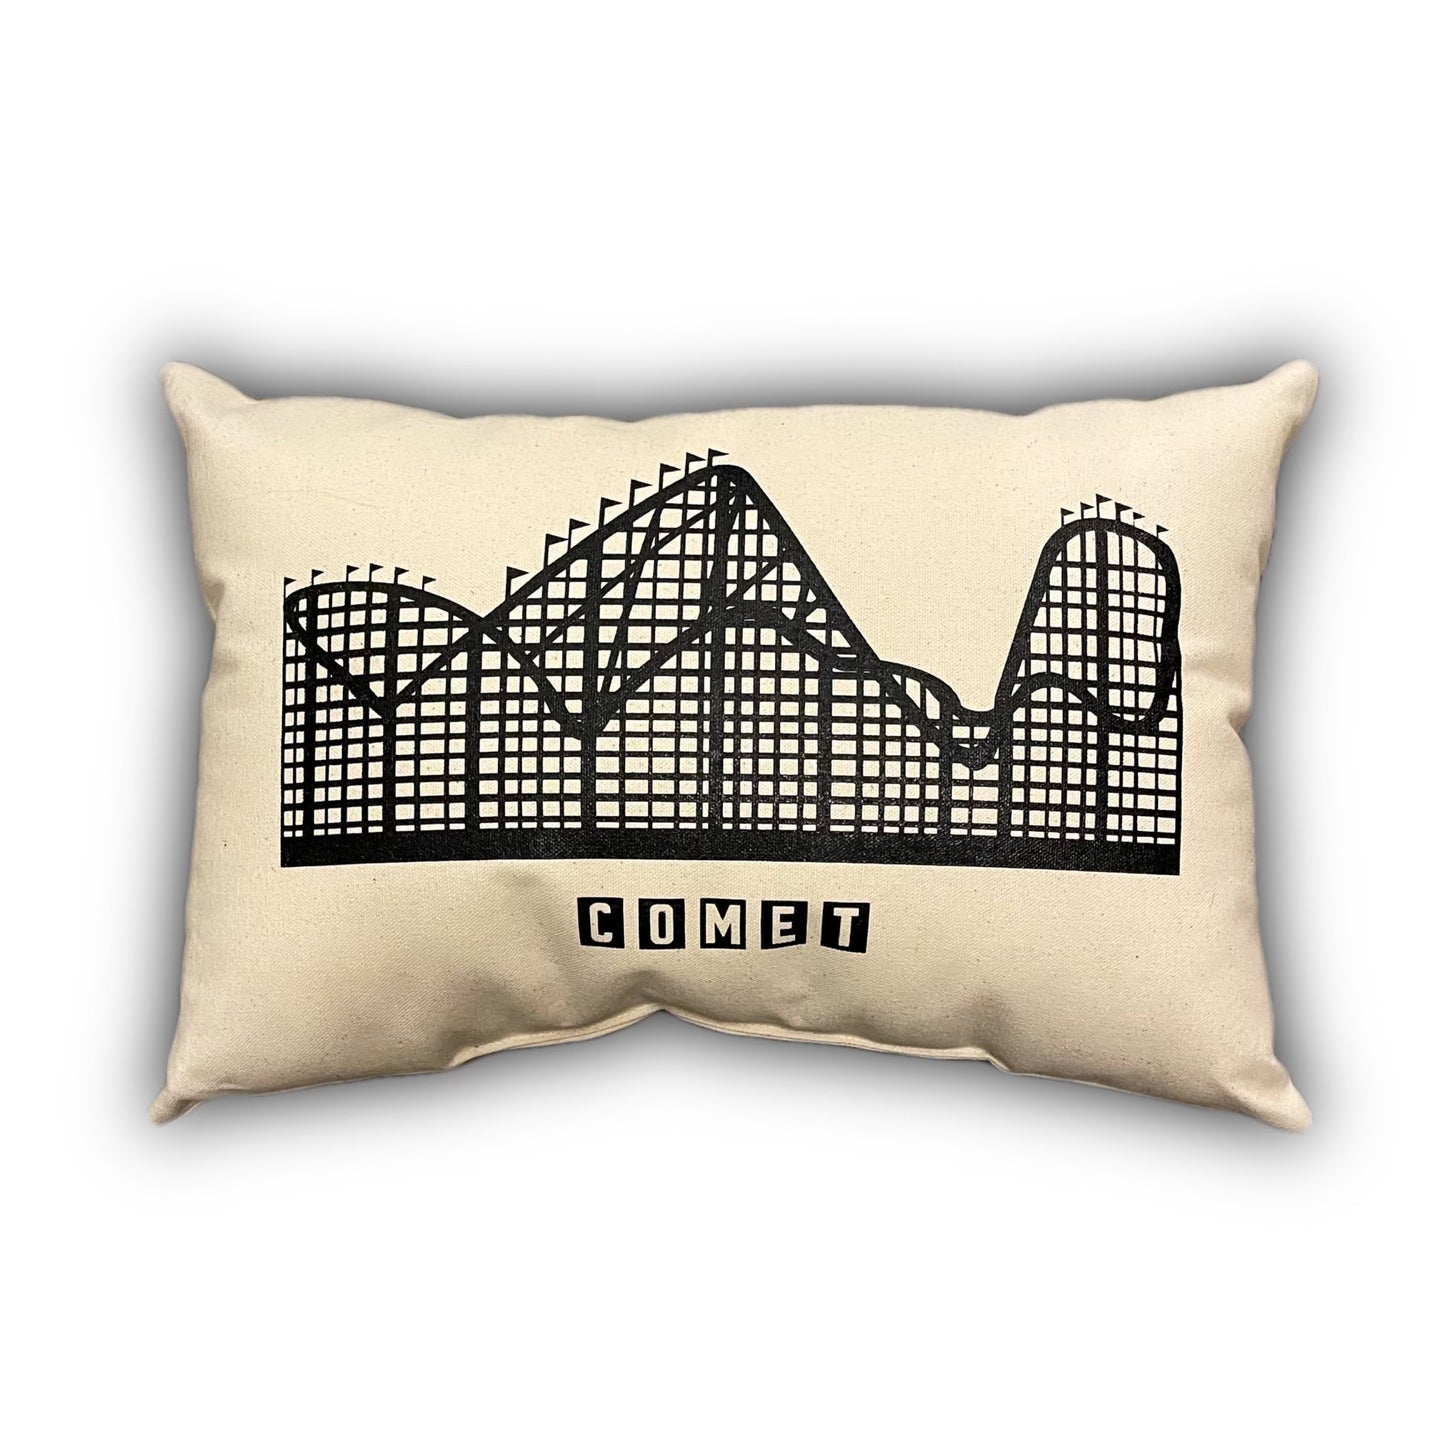 The Comet Rollercoaster Pillow